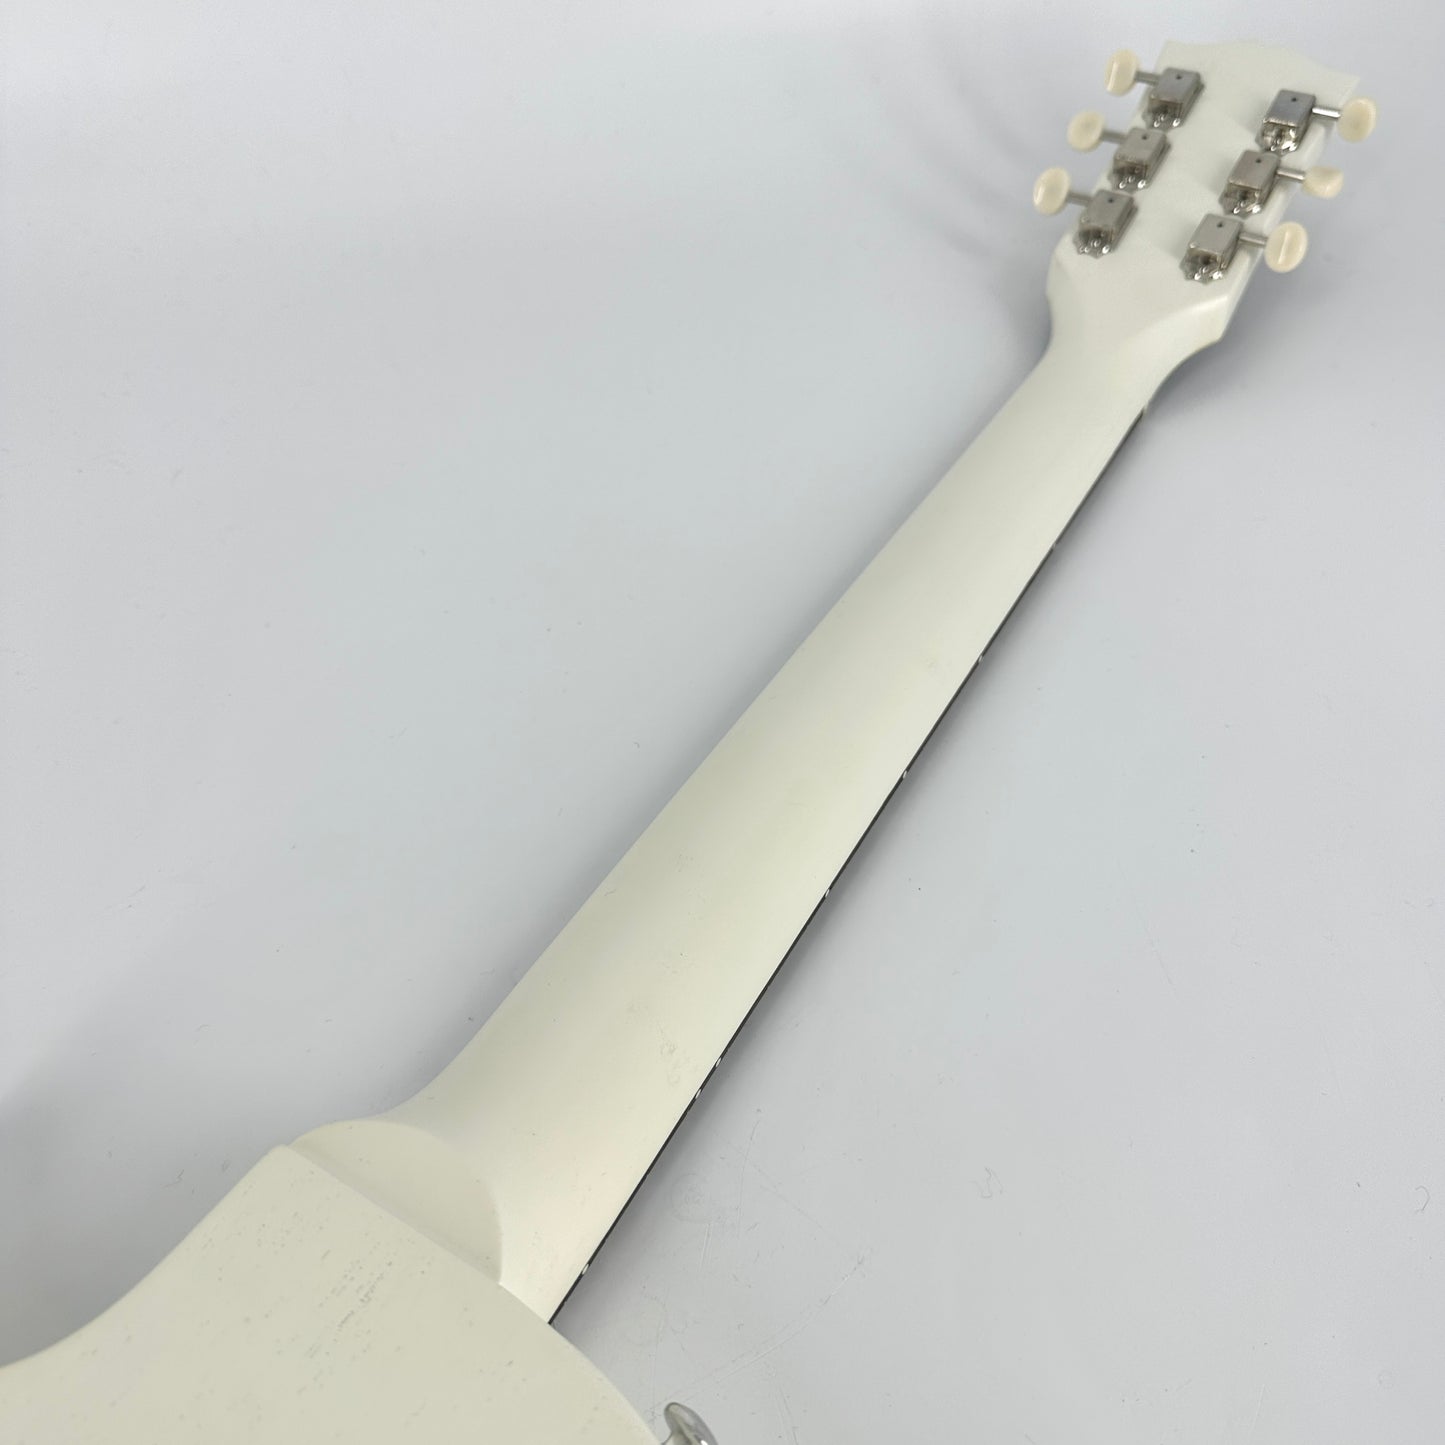 2021 Gibson Les Paul Special Tribute Humbucker – Worn White